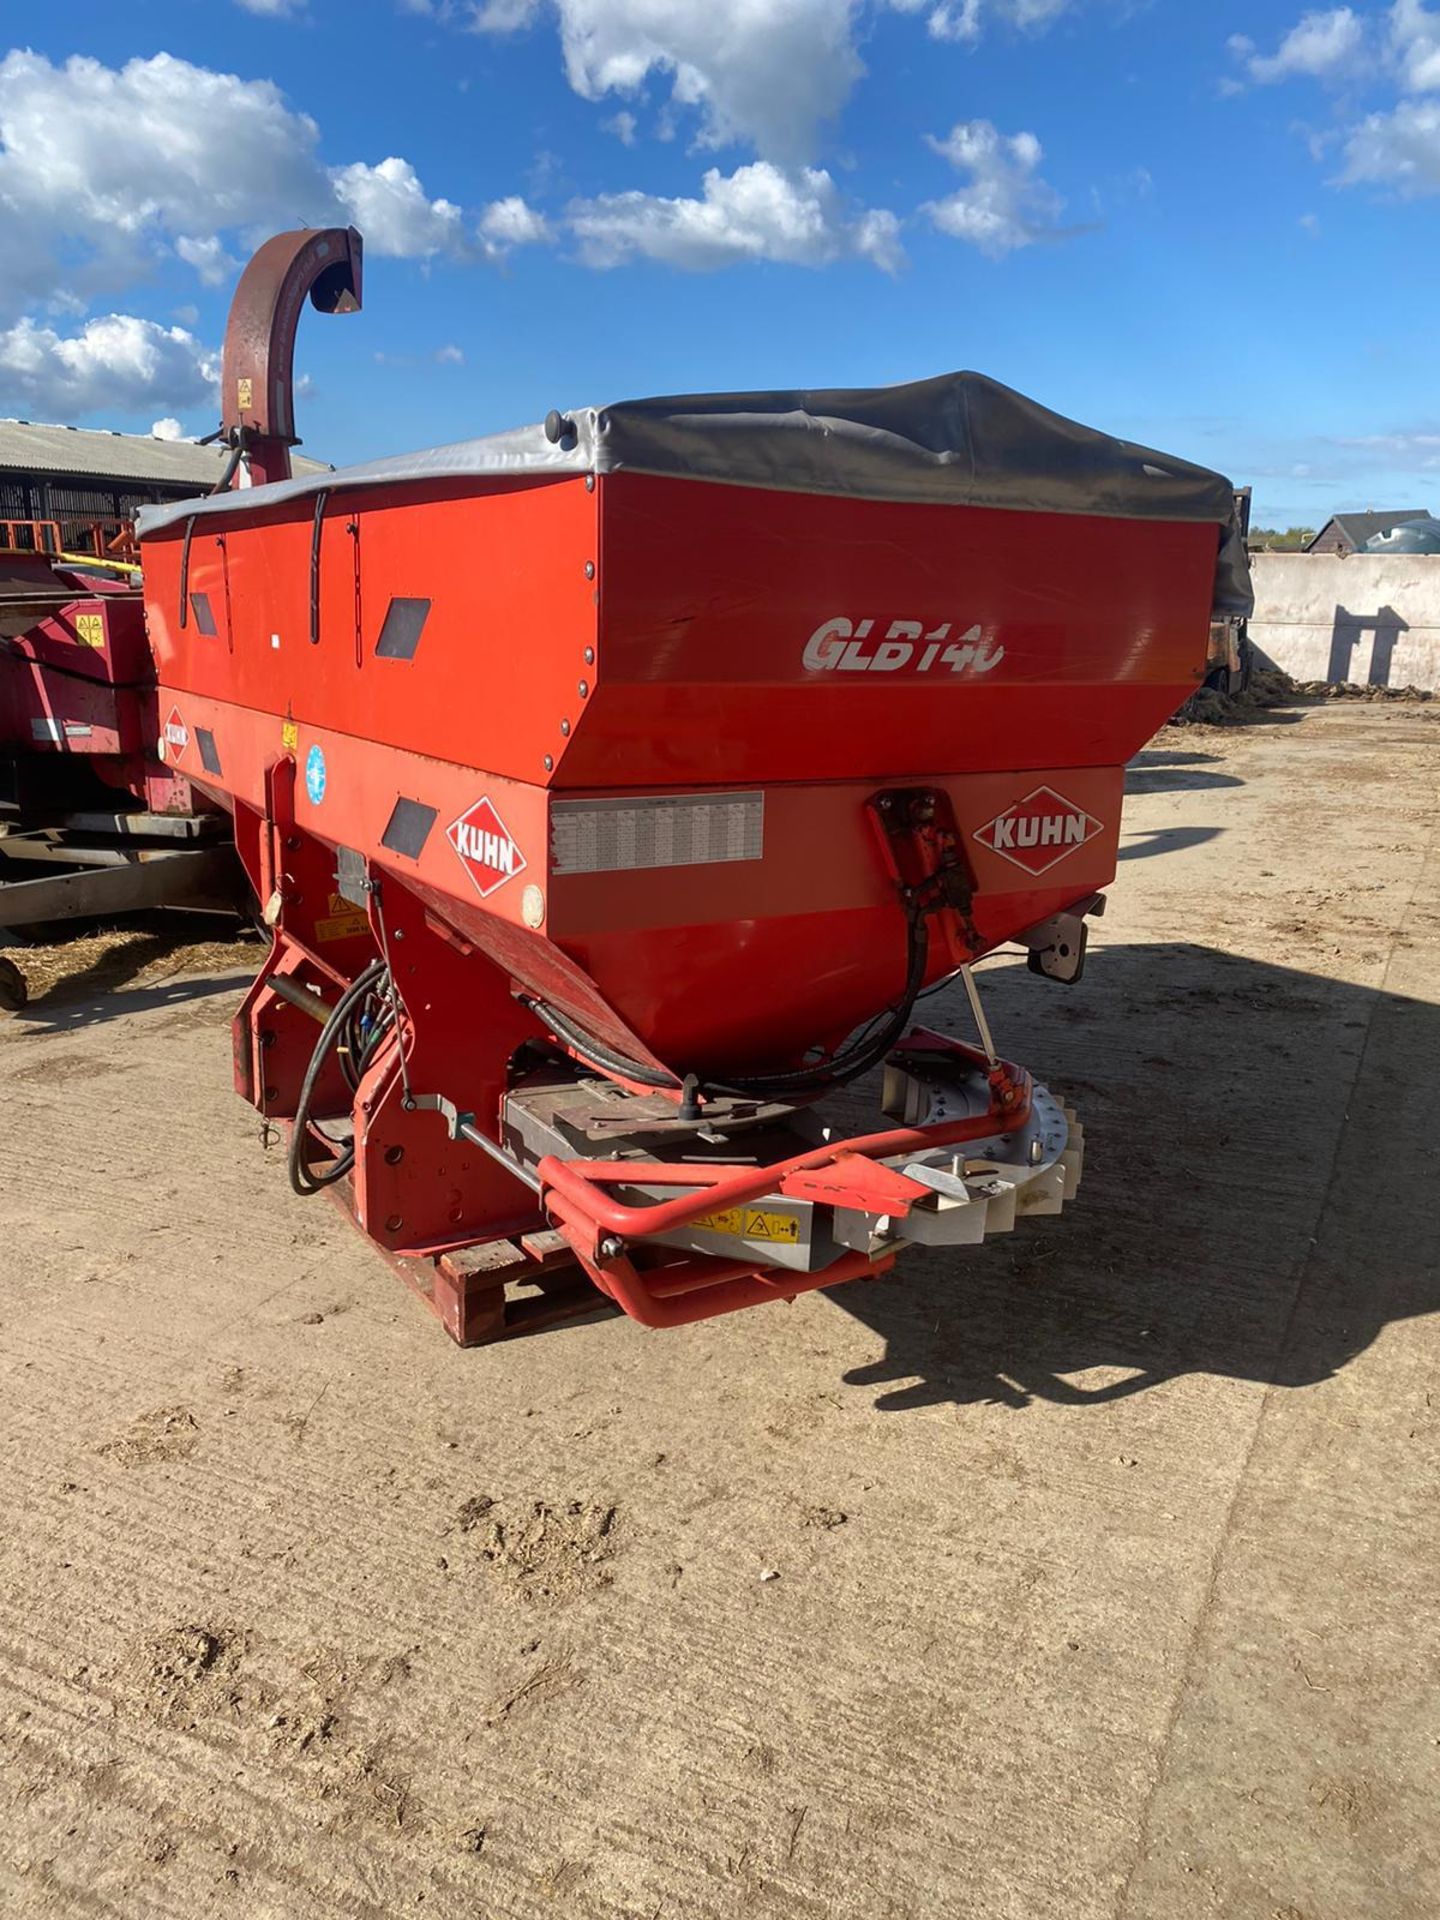 KUHN GLB1400 FERTILISER SPREADER SPINNER, IN WORKING CONDITION, COMES WITH PTO READY TO USE *NO VAT* - Image 3 of 7